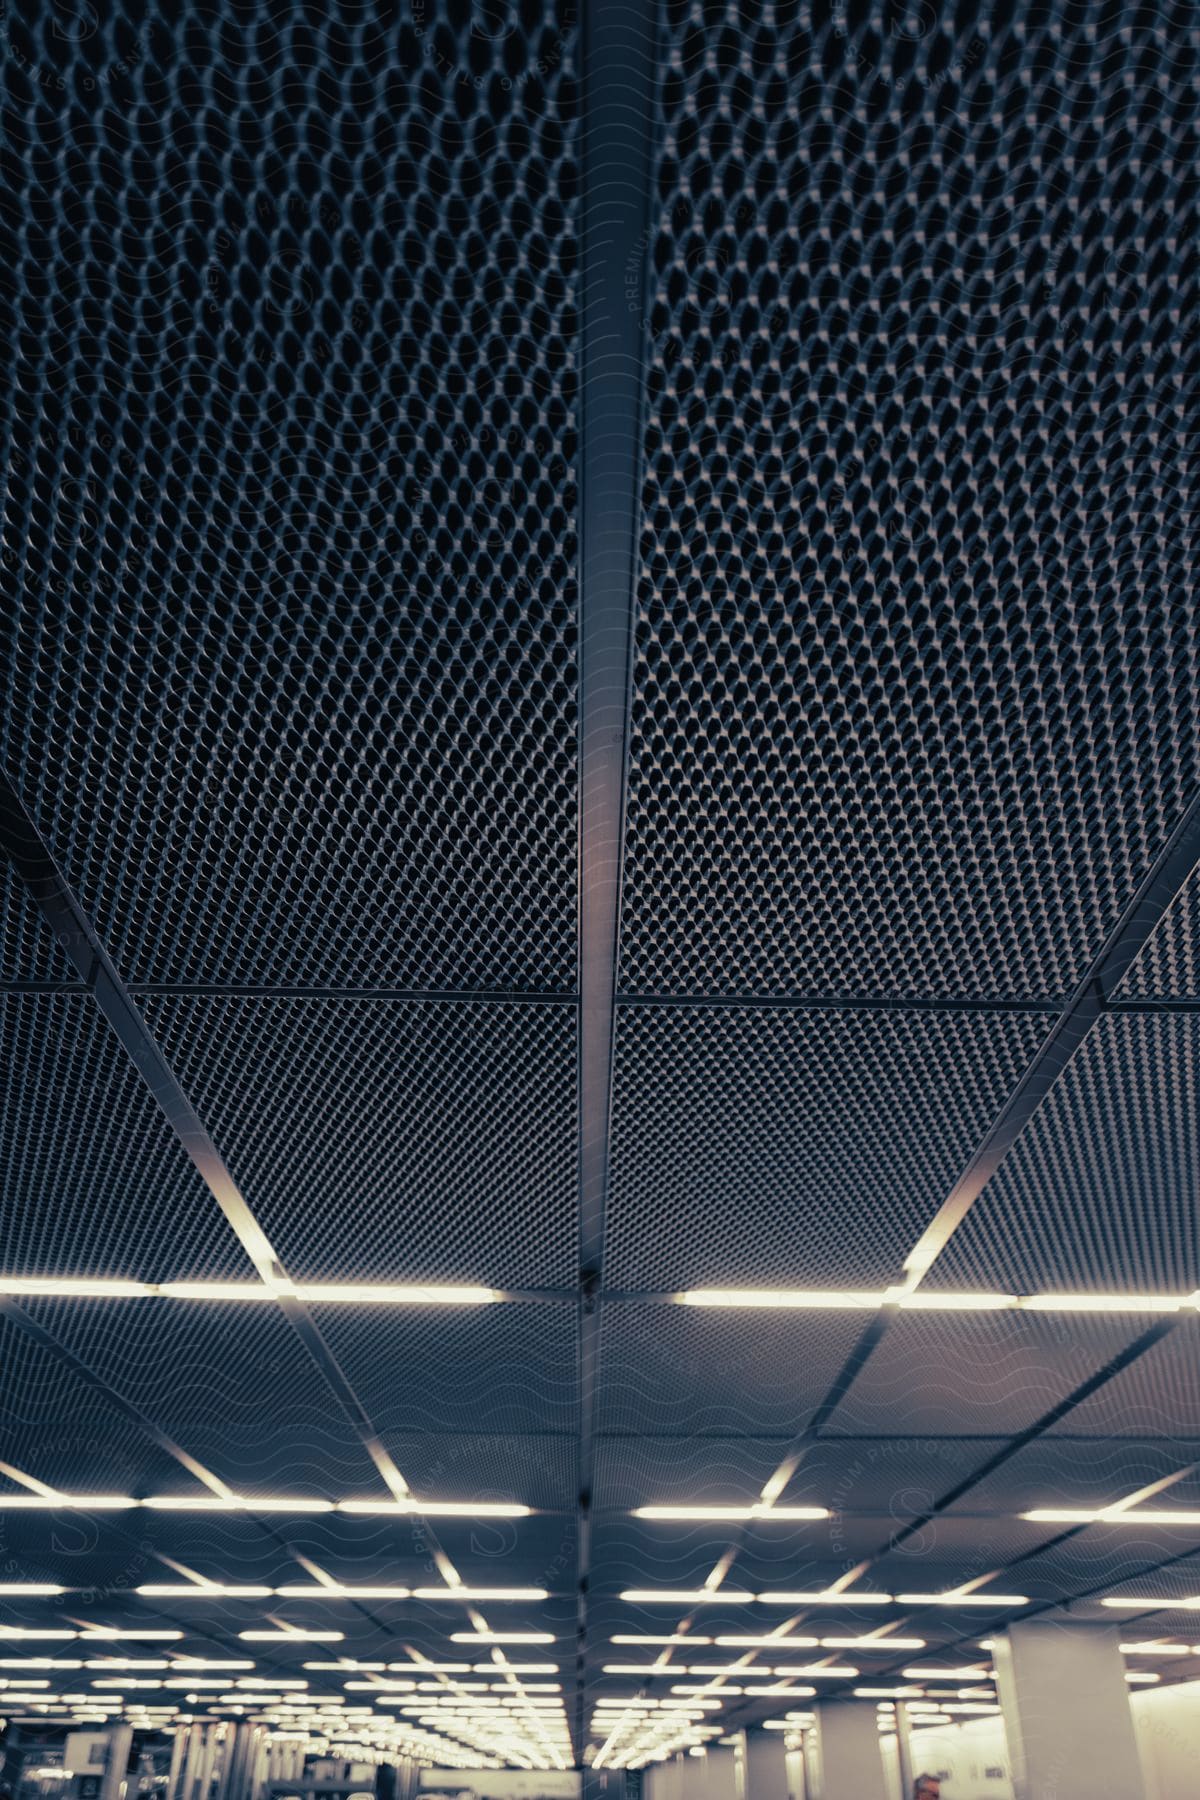 Ceiling tiles and lights arranged in square patterns in an indoor space